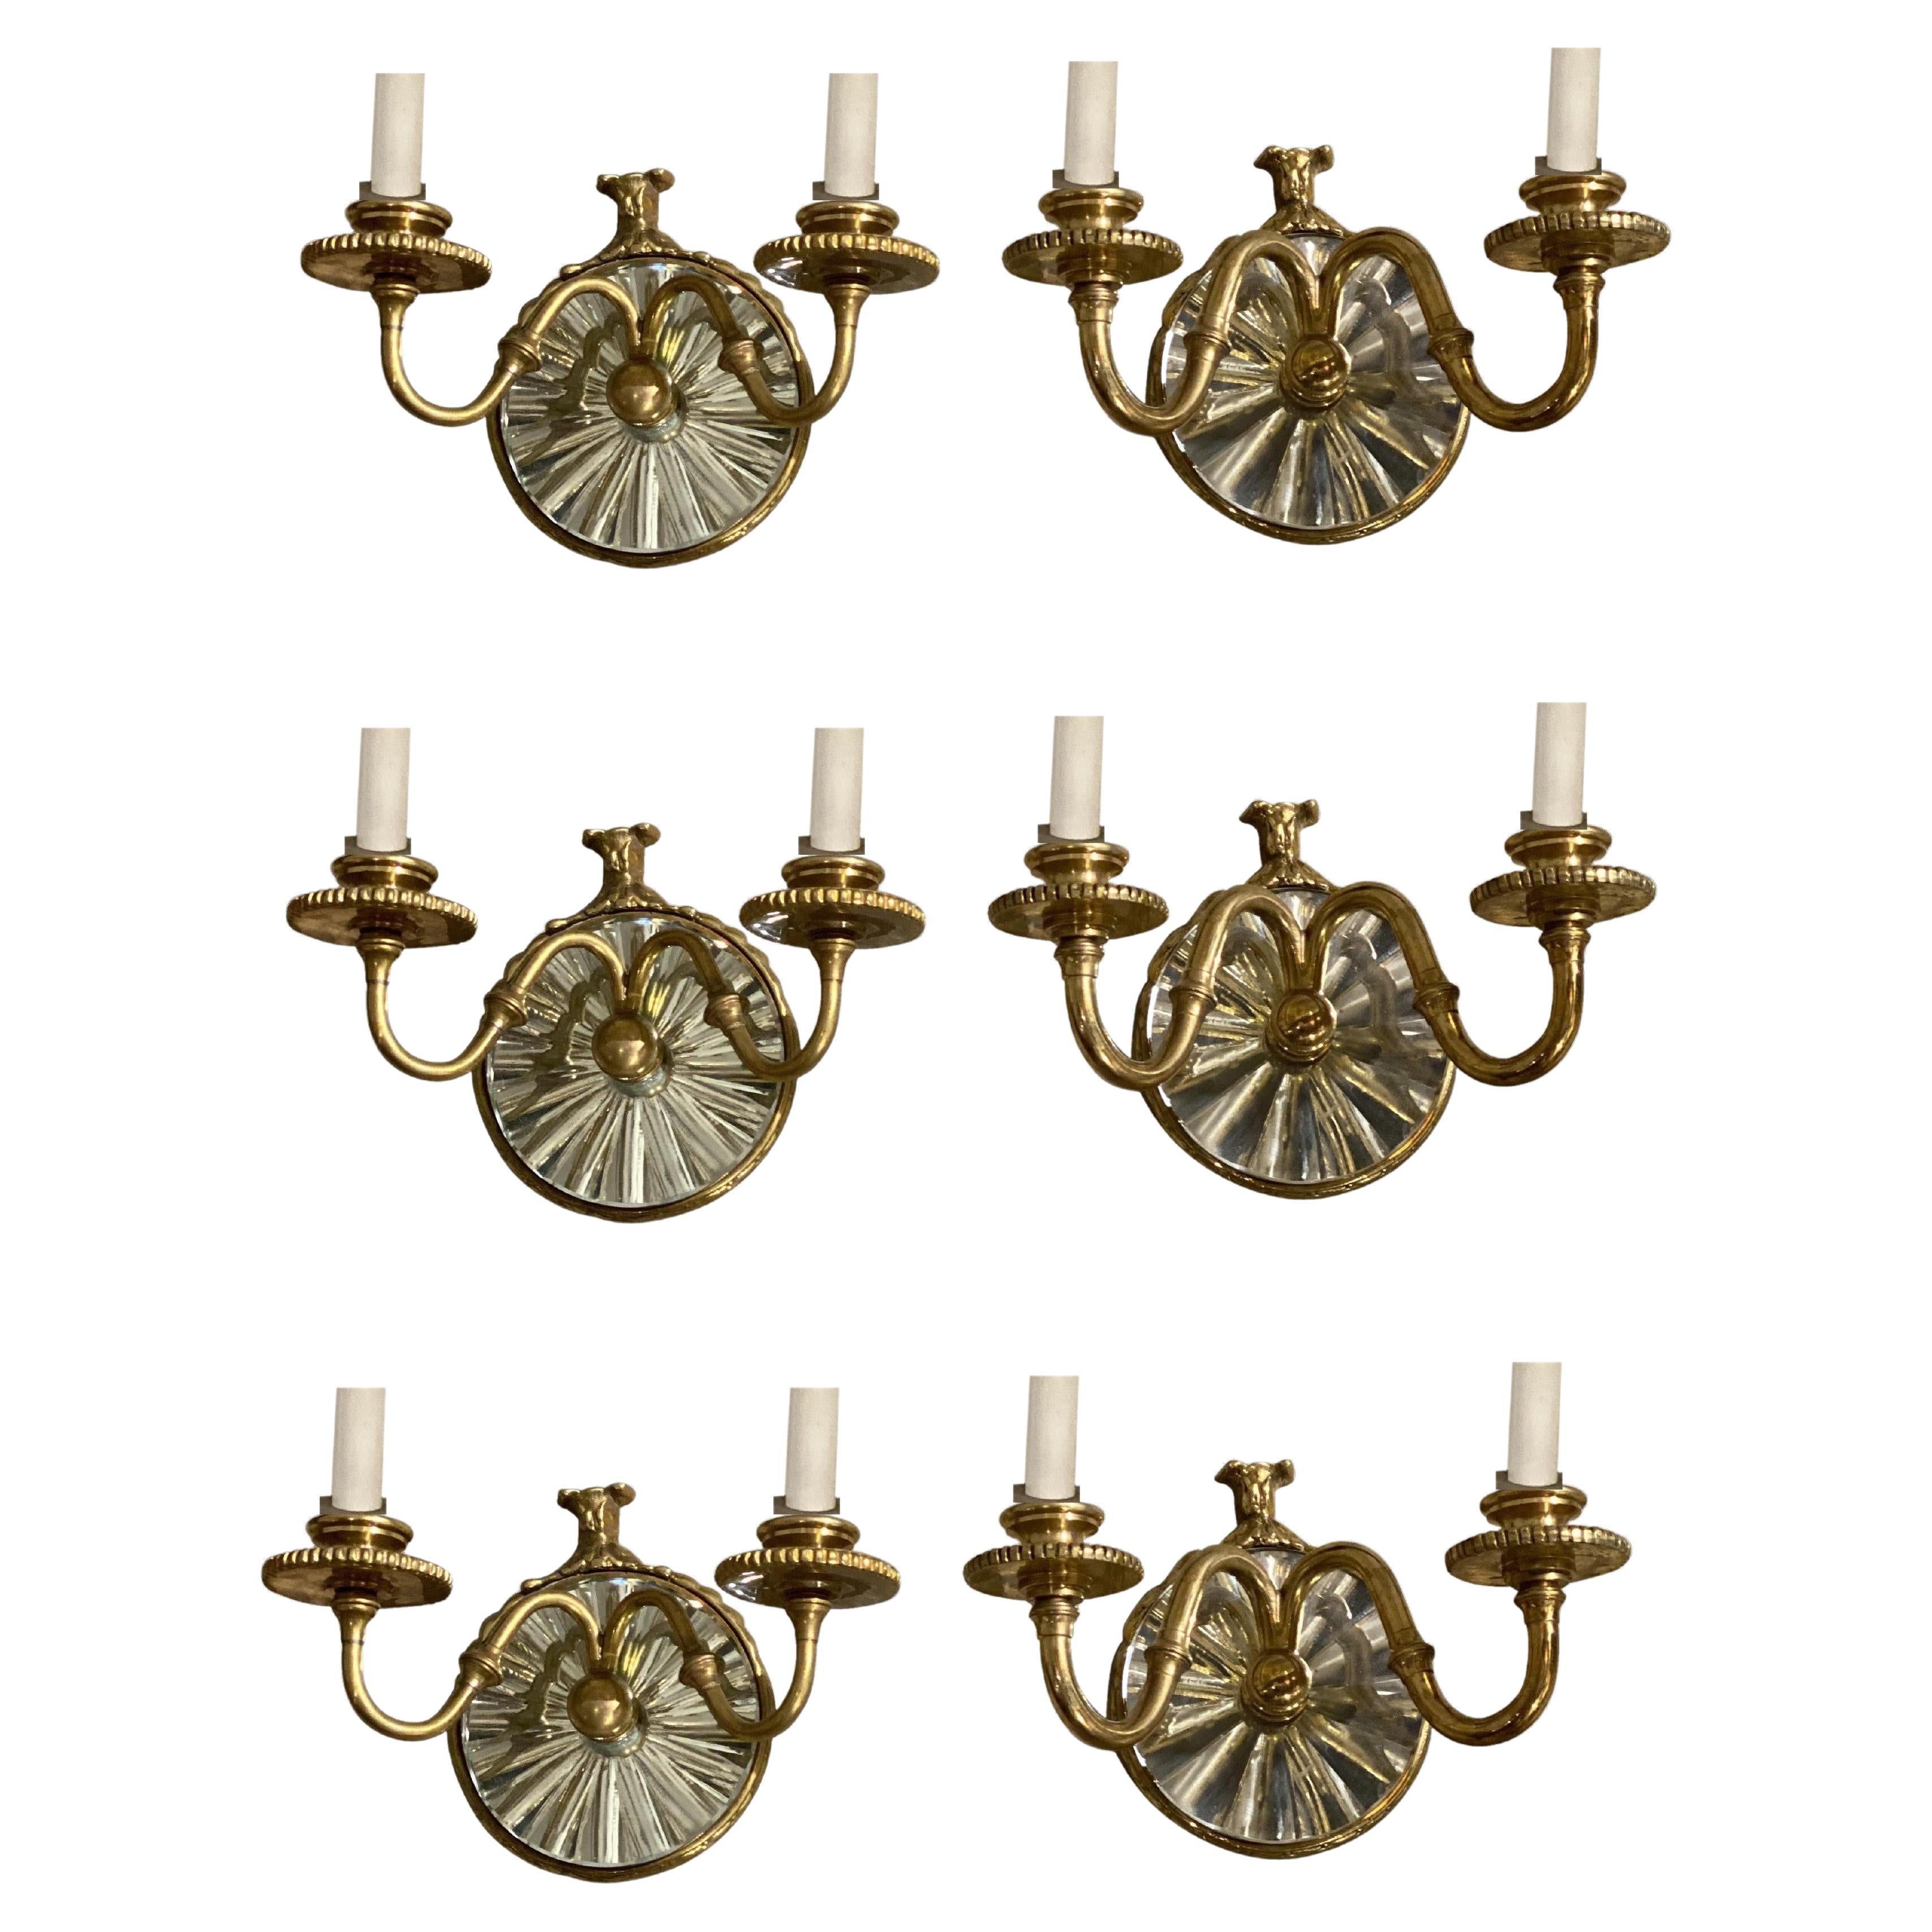 1920's Caldwell Small Mirror Sconces with 2 lights